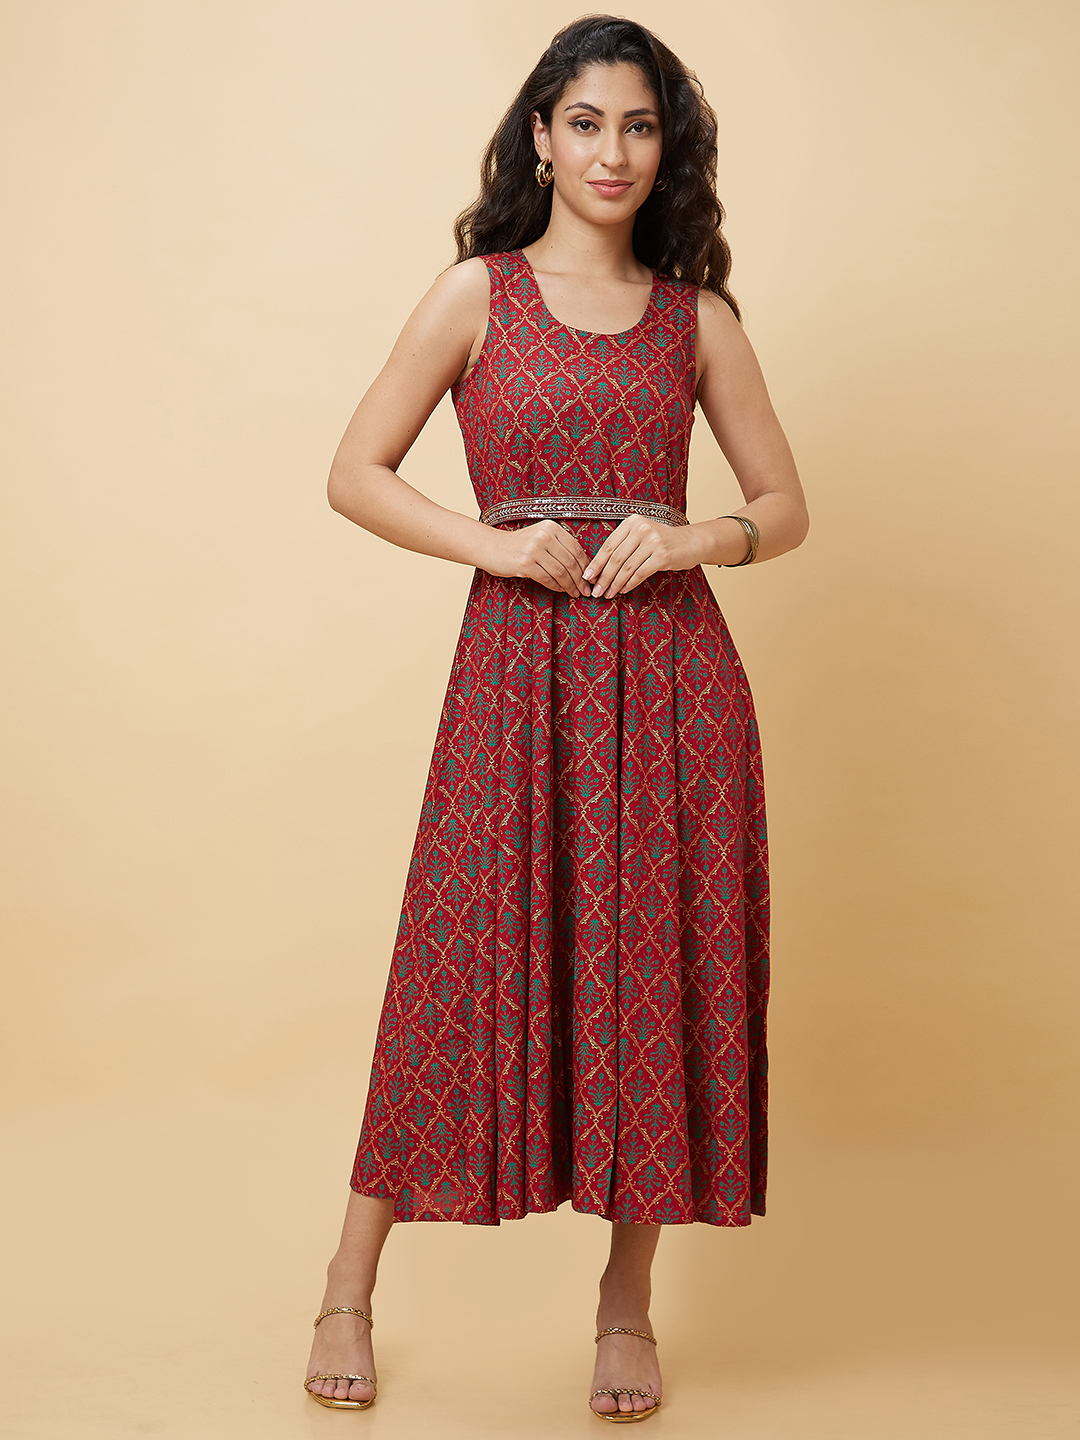 Globus Women Maroon Ethnic Motifs Print With Embroidered Belt A-Line Maxi Dress